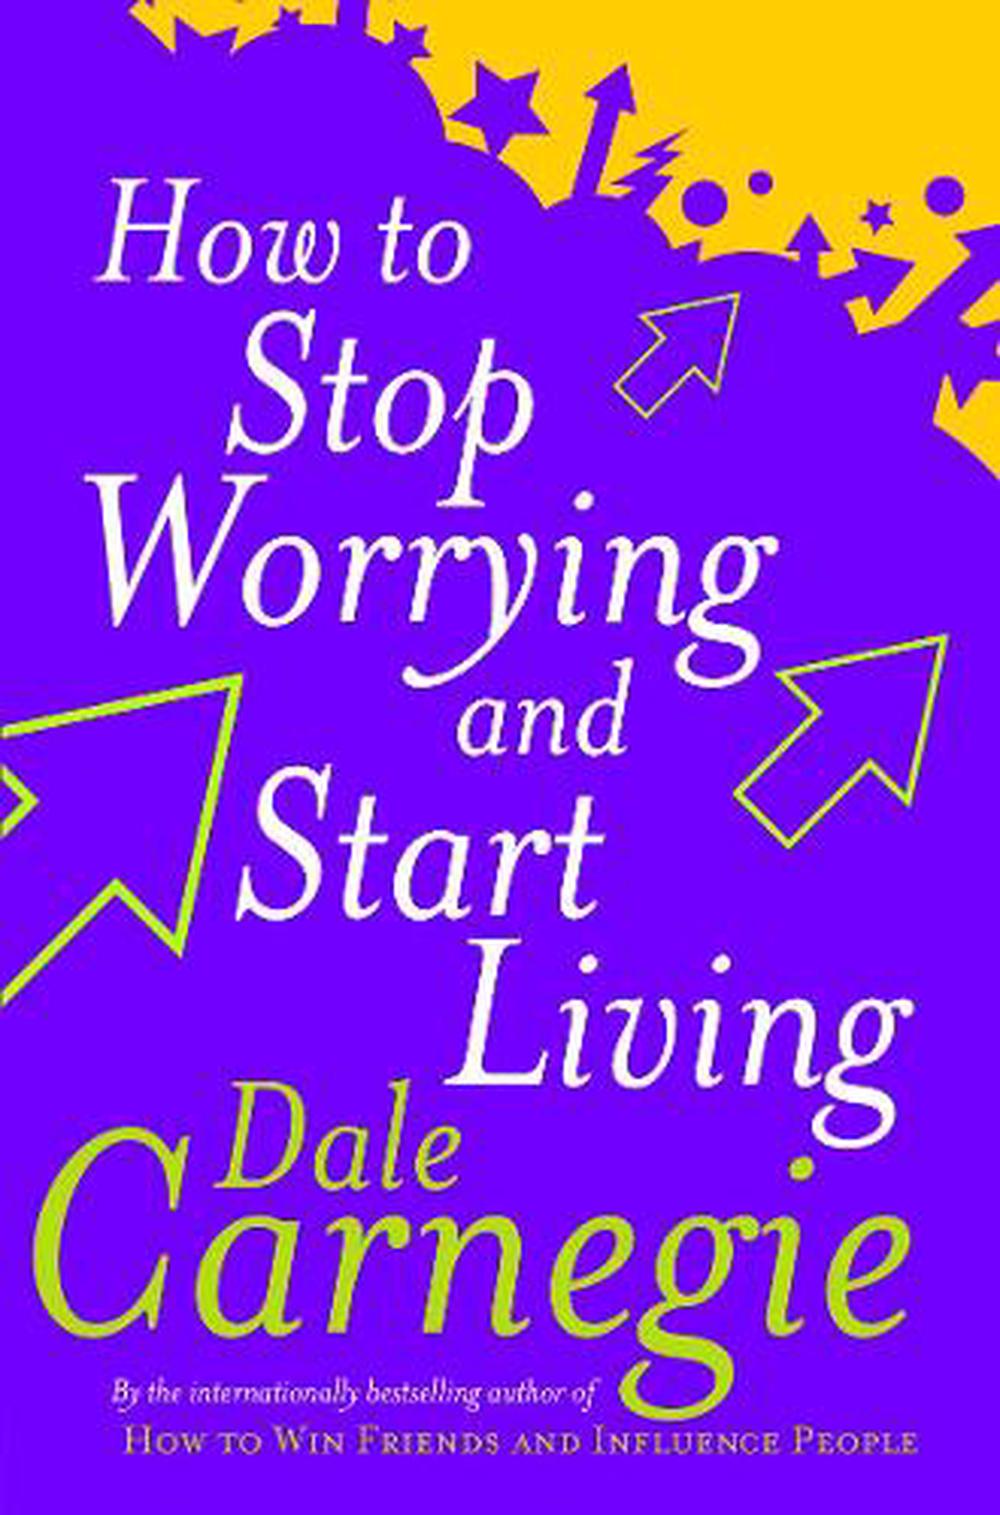 book review of how to stop worrying and start living